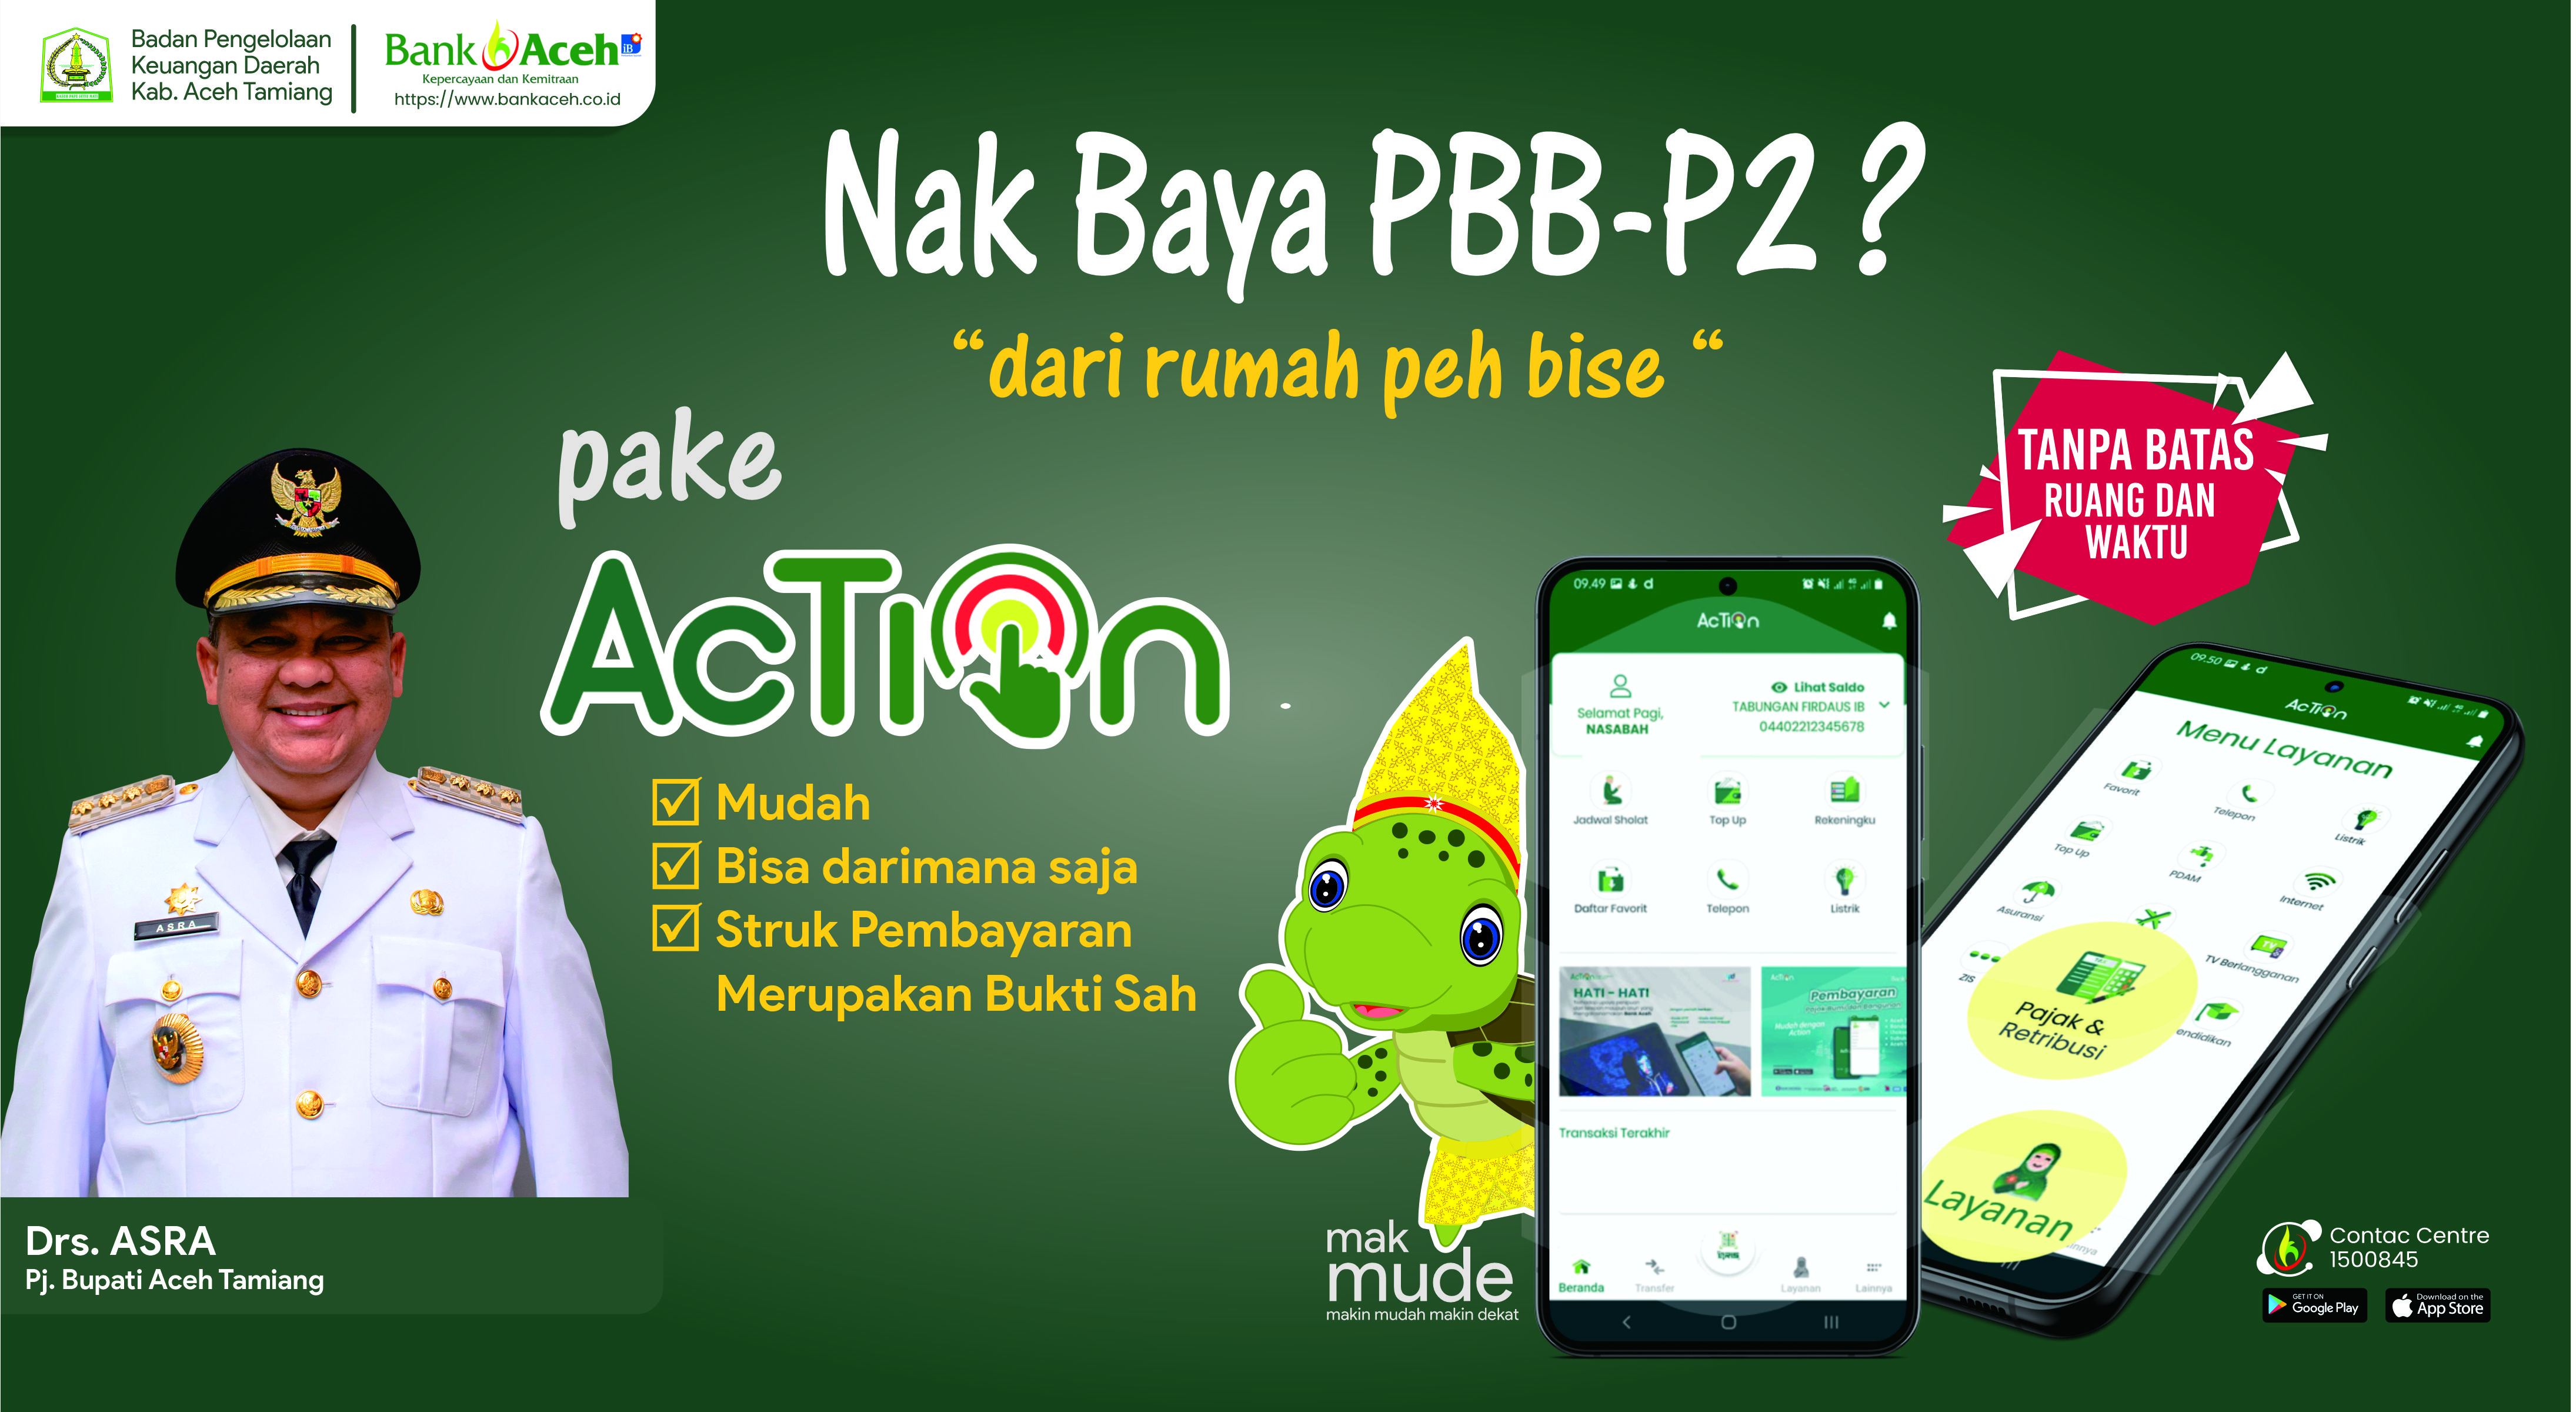 Action Bank Aceh